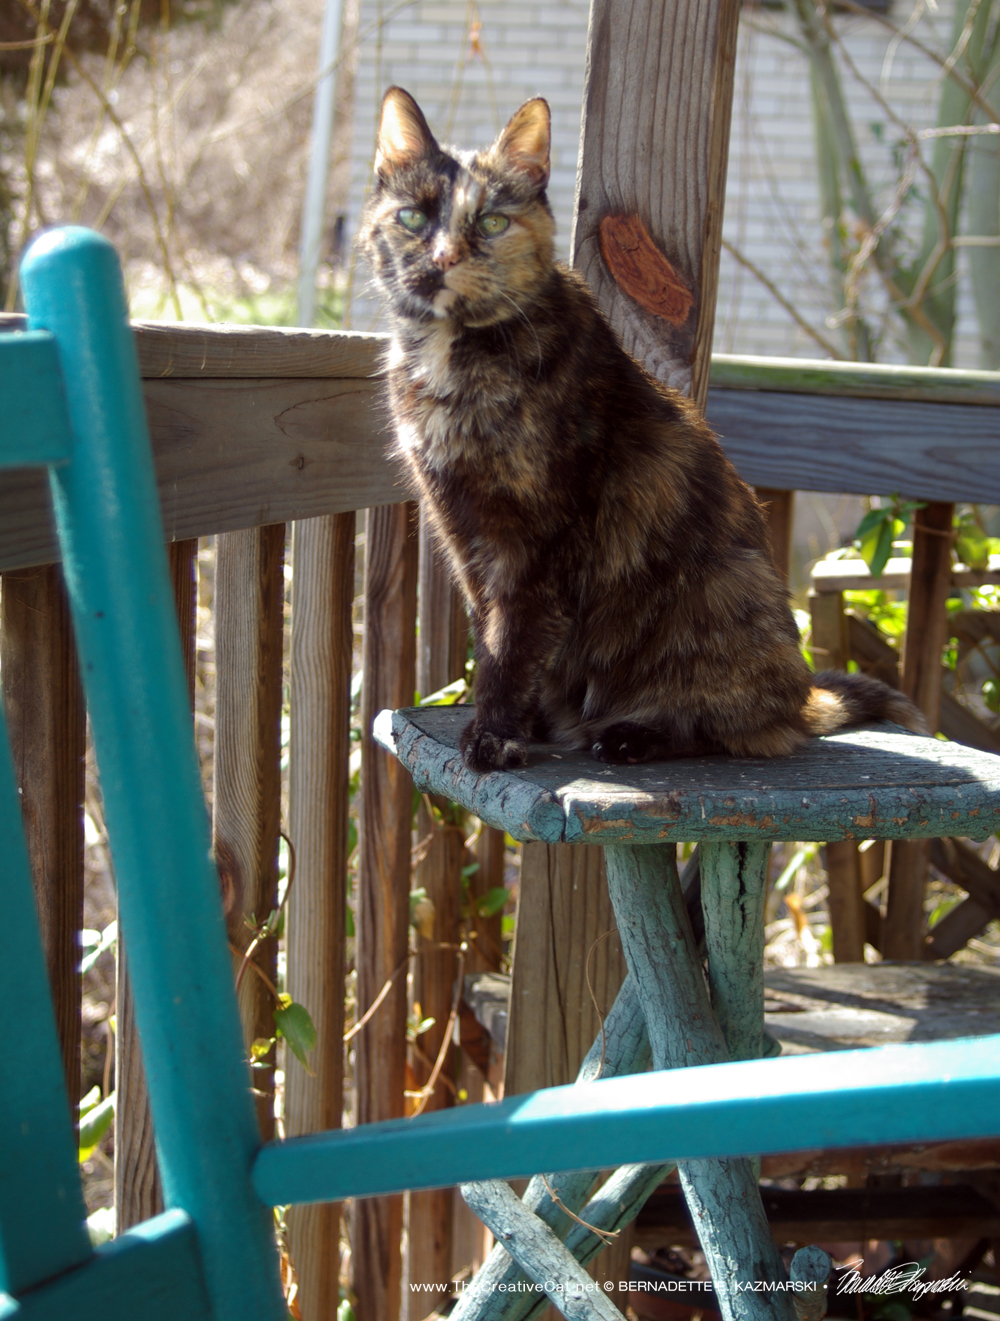 Cookie waits on her observation table.